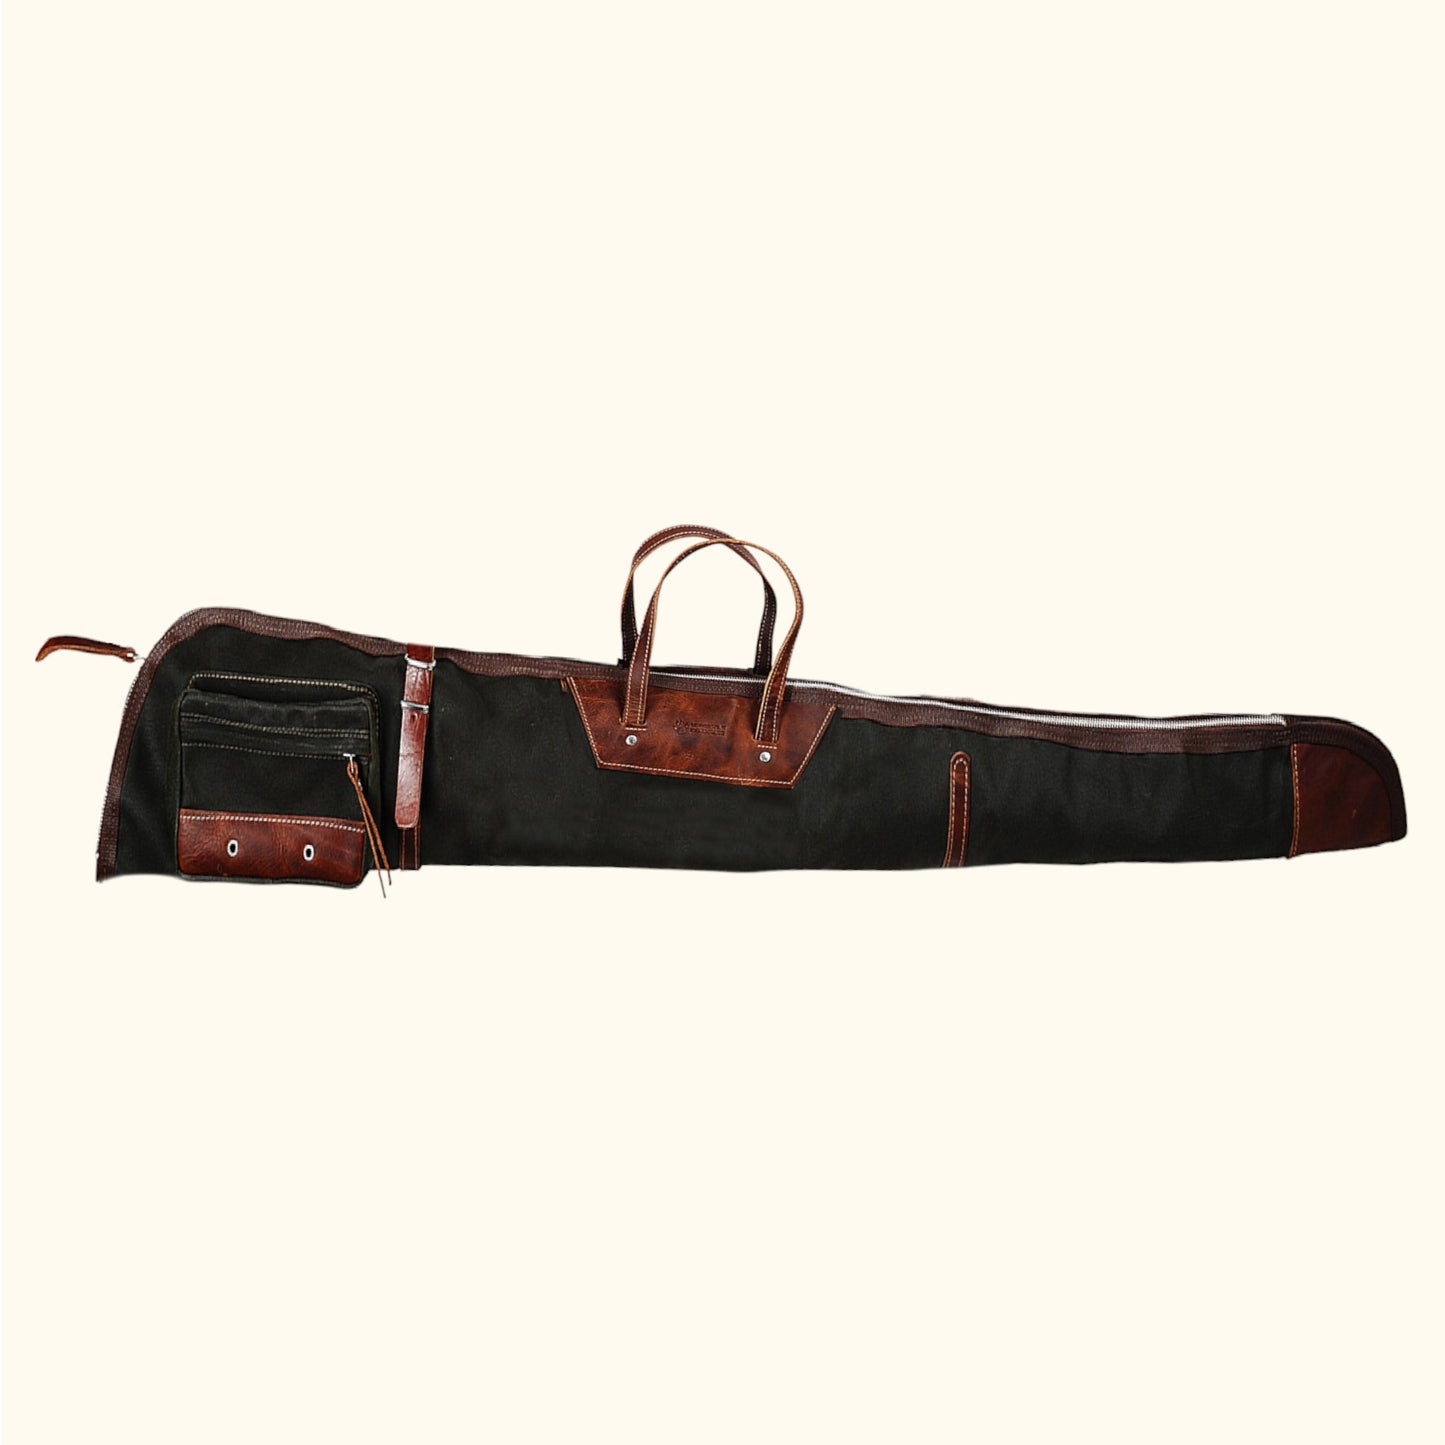 40 inch to 60 inch | Shotgun Cases | Rifle Cases | Leather | Canvas | Shotgun Case | Shotgun Bag | Hunting | Shotgun | Gun case | Personalization  99percenthandmade   